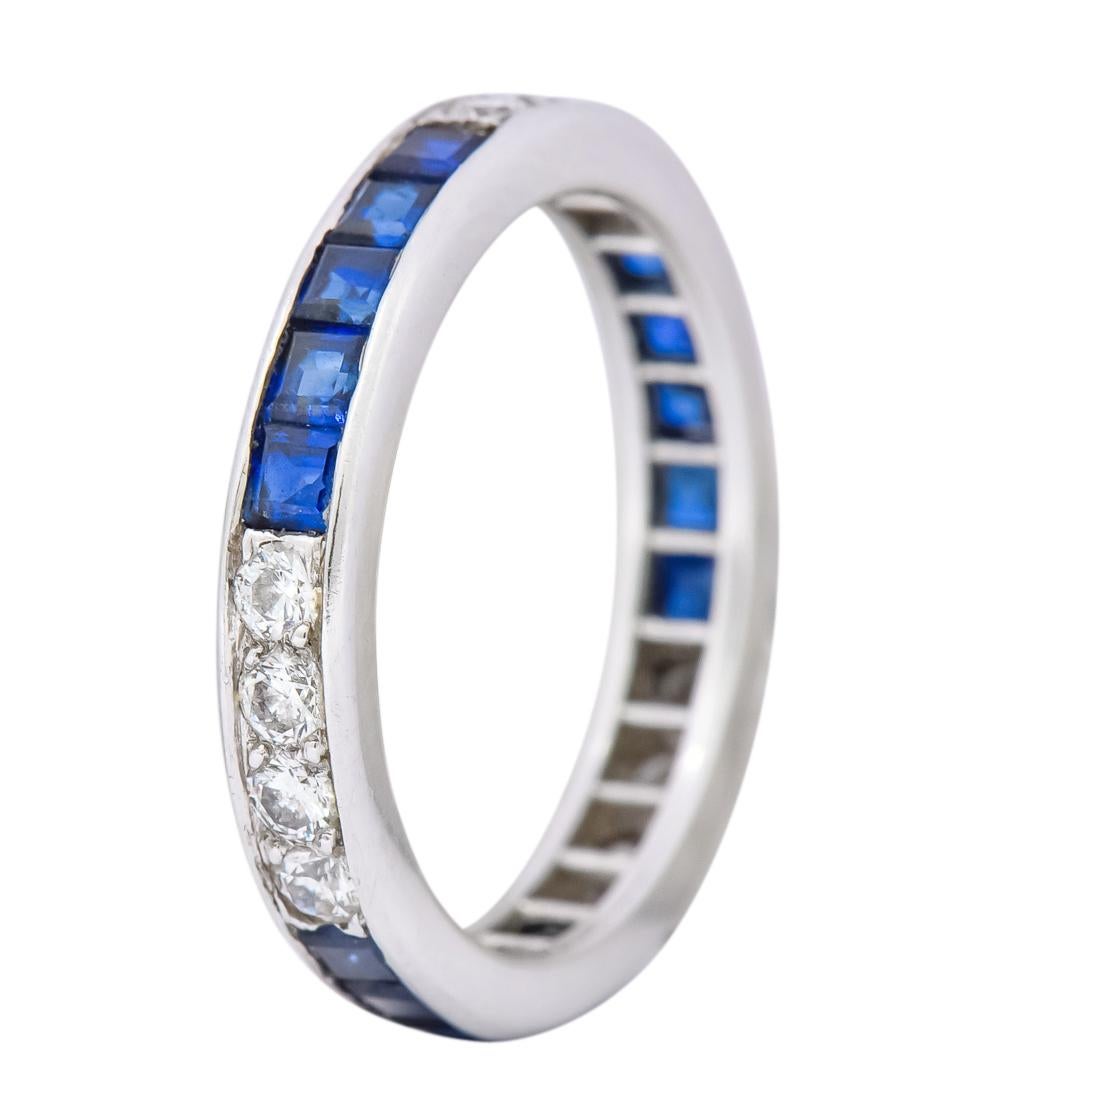 Eternity style band with polished channel edges

Channel set with square cut sapphires weighing approximately 1.00 carat total, inky blue in color and very well matched

Alternating with bead set round brilliant cut diamonds 0.42 carat total, G/H